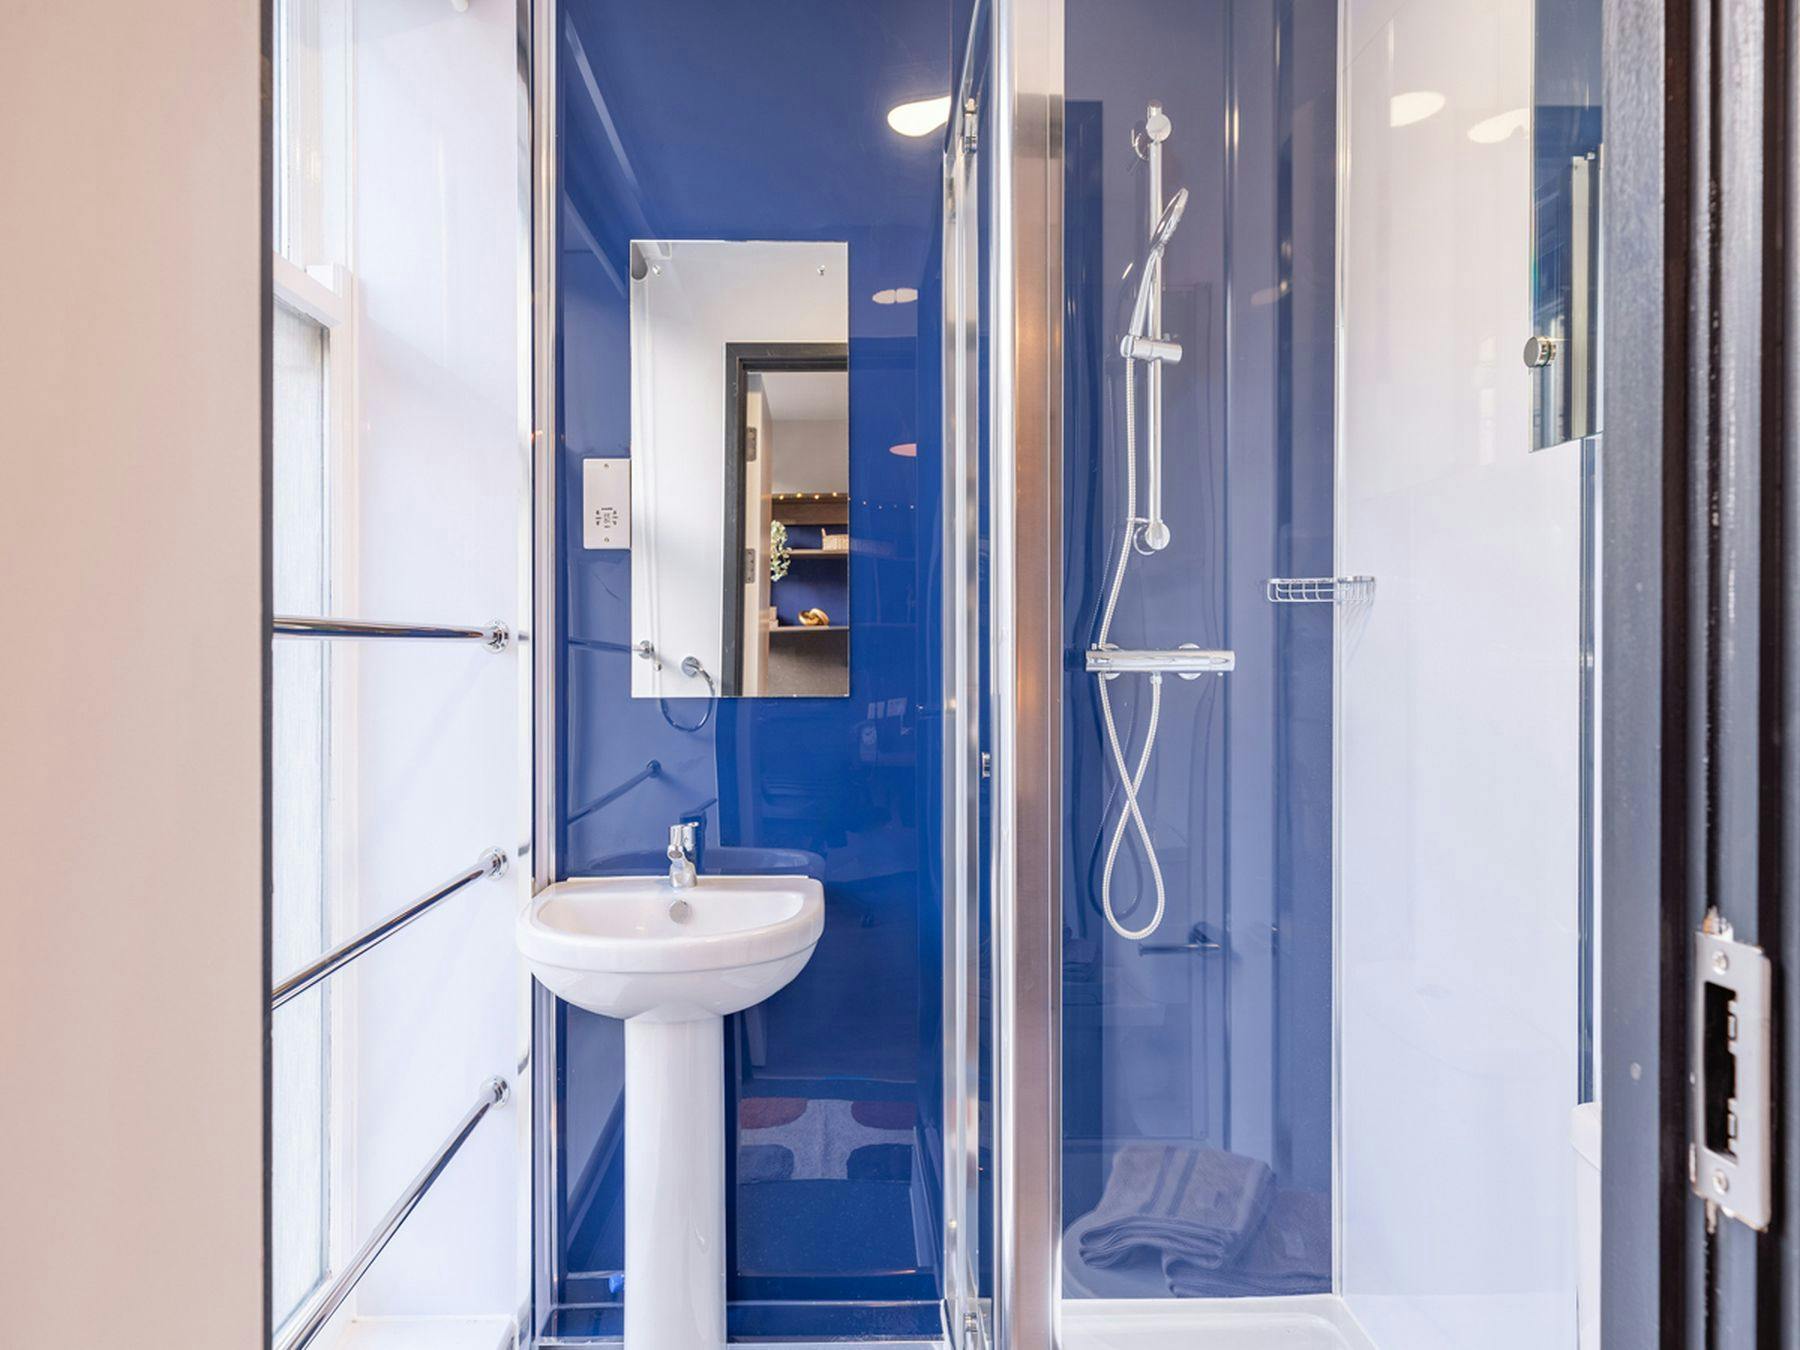 A photograph of The Leather Works deluxe ensuite with a blue reflective wall, mirror, sink and shower.